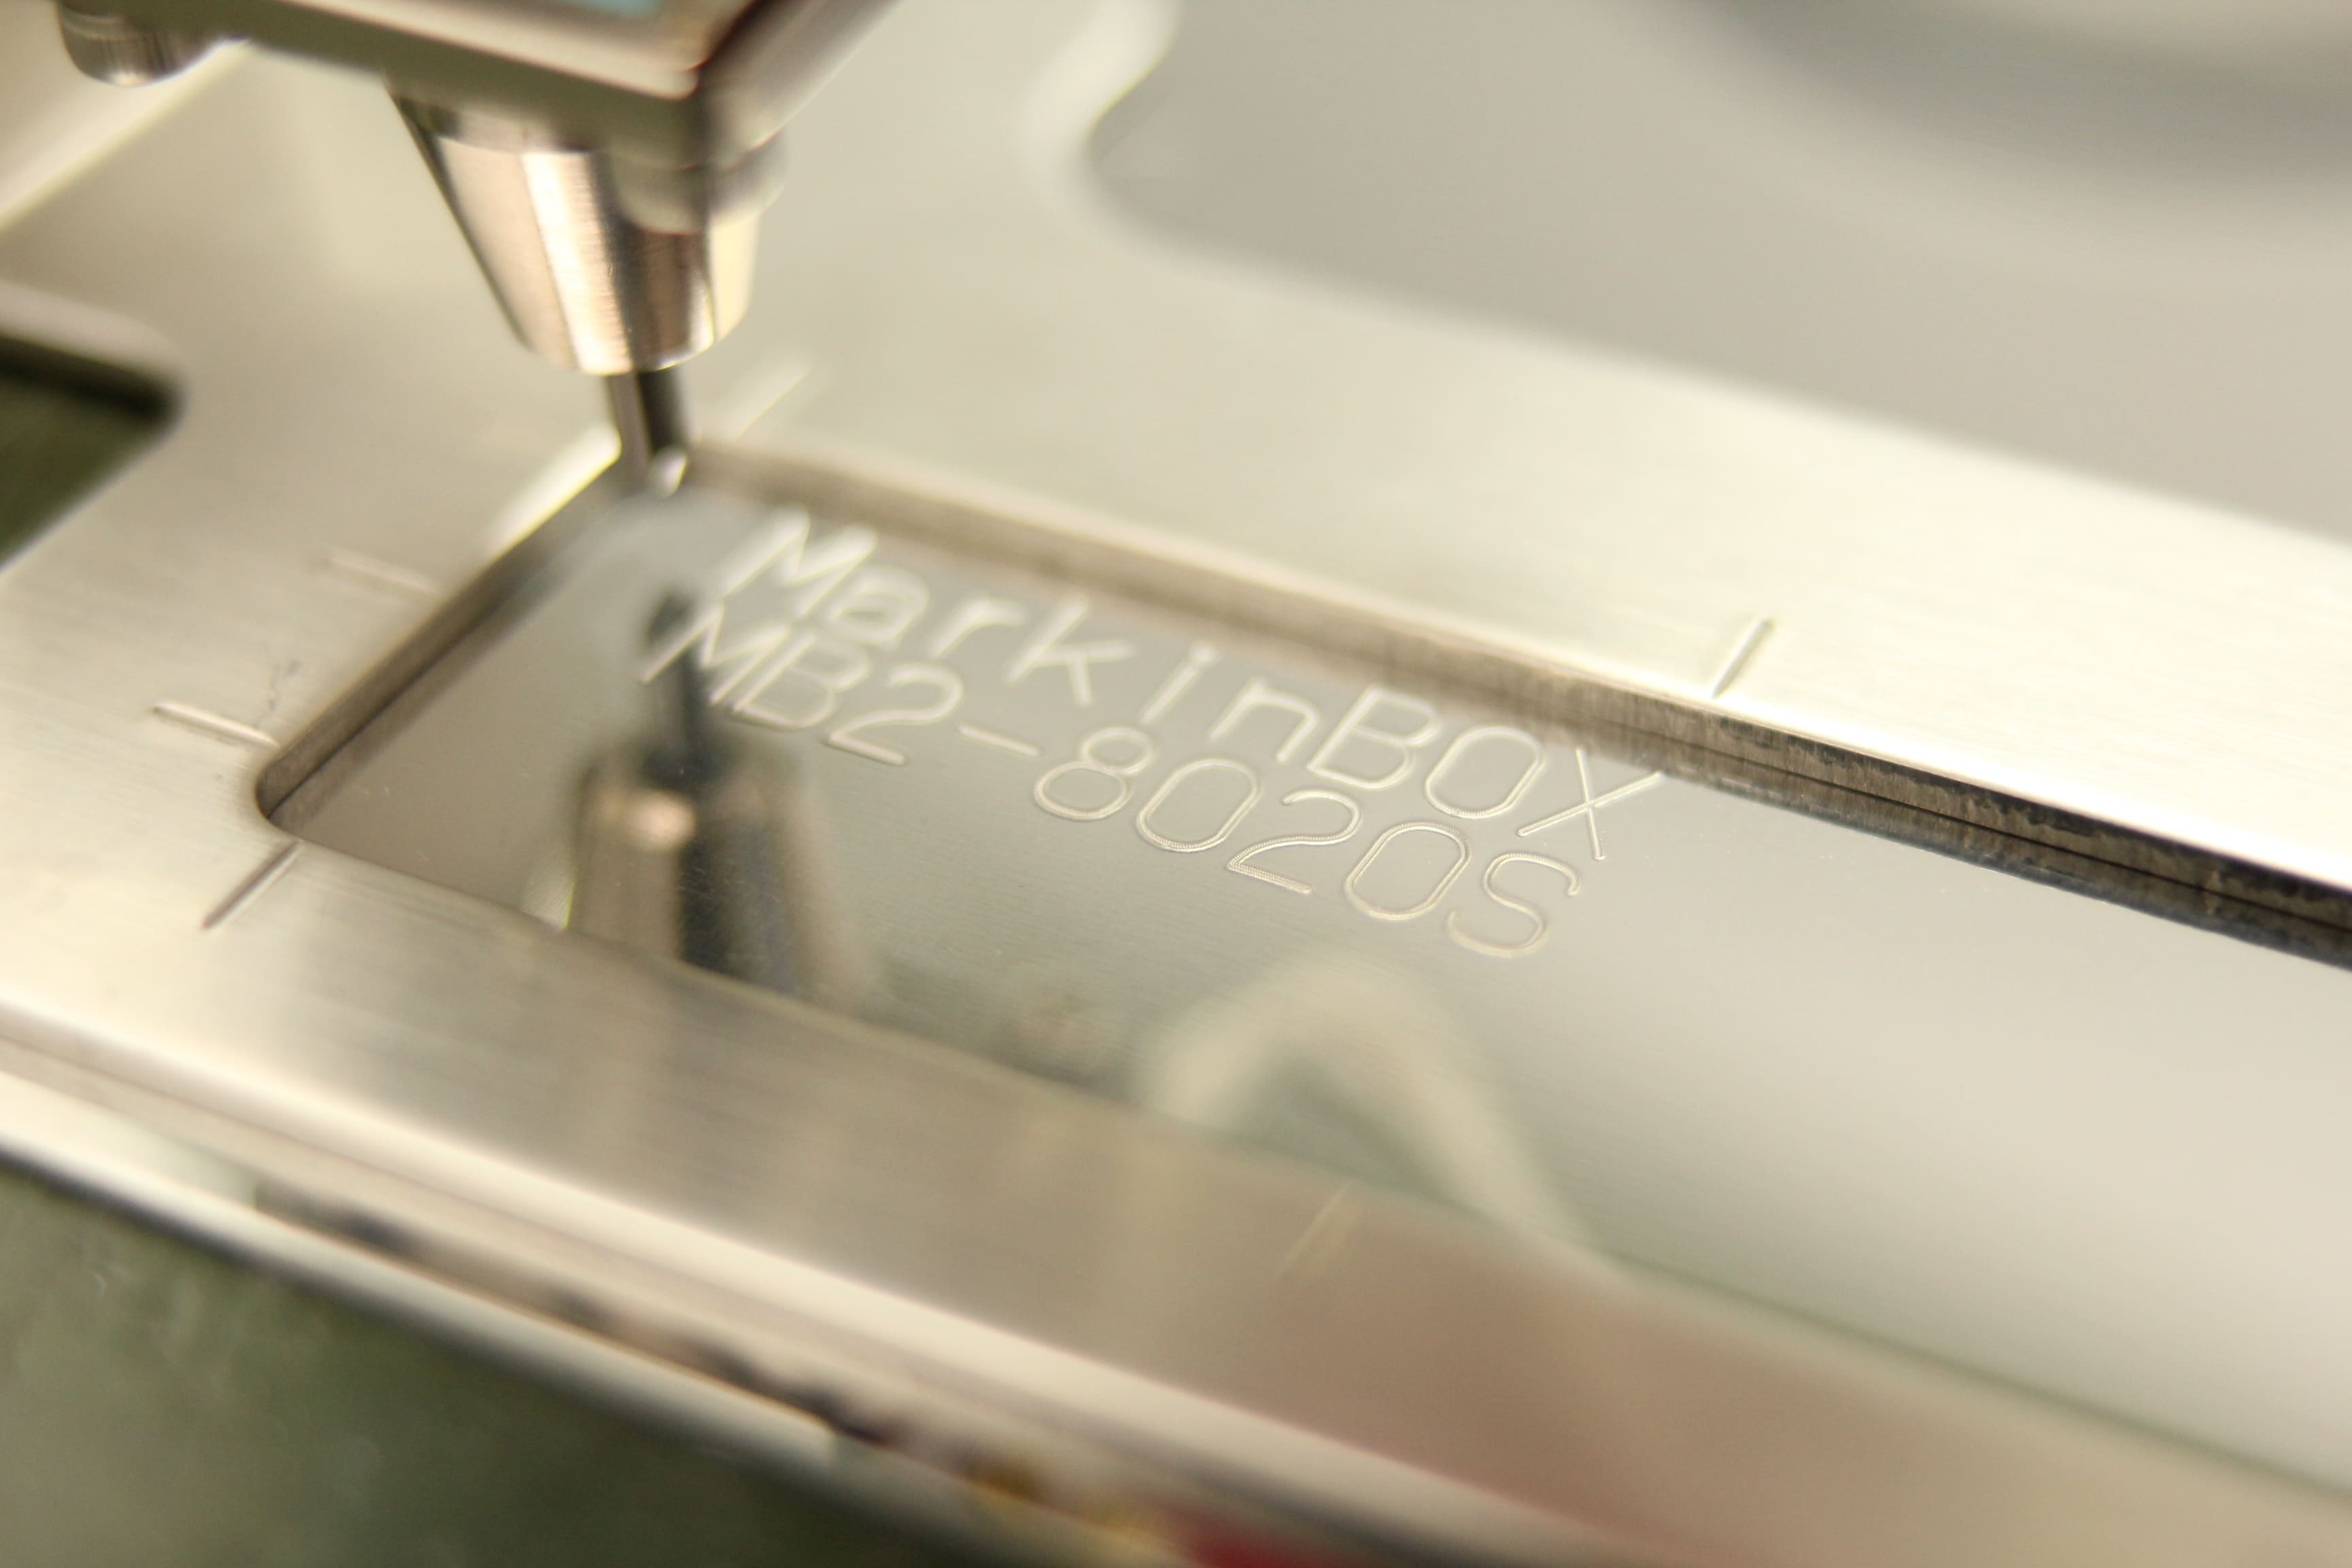 Image of 'MarkinBOX' and serial numbers 'MB2-8020S' engraved on stainless steel